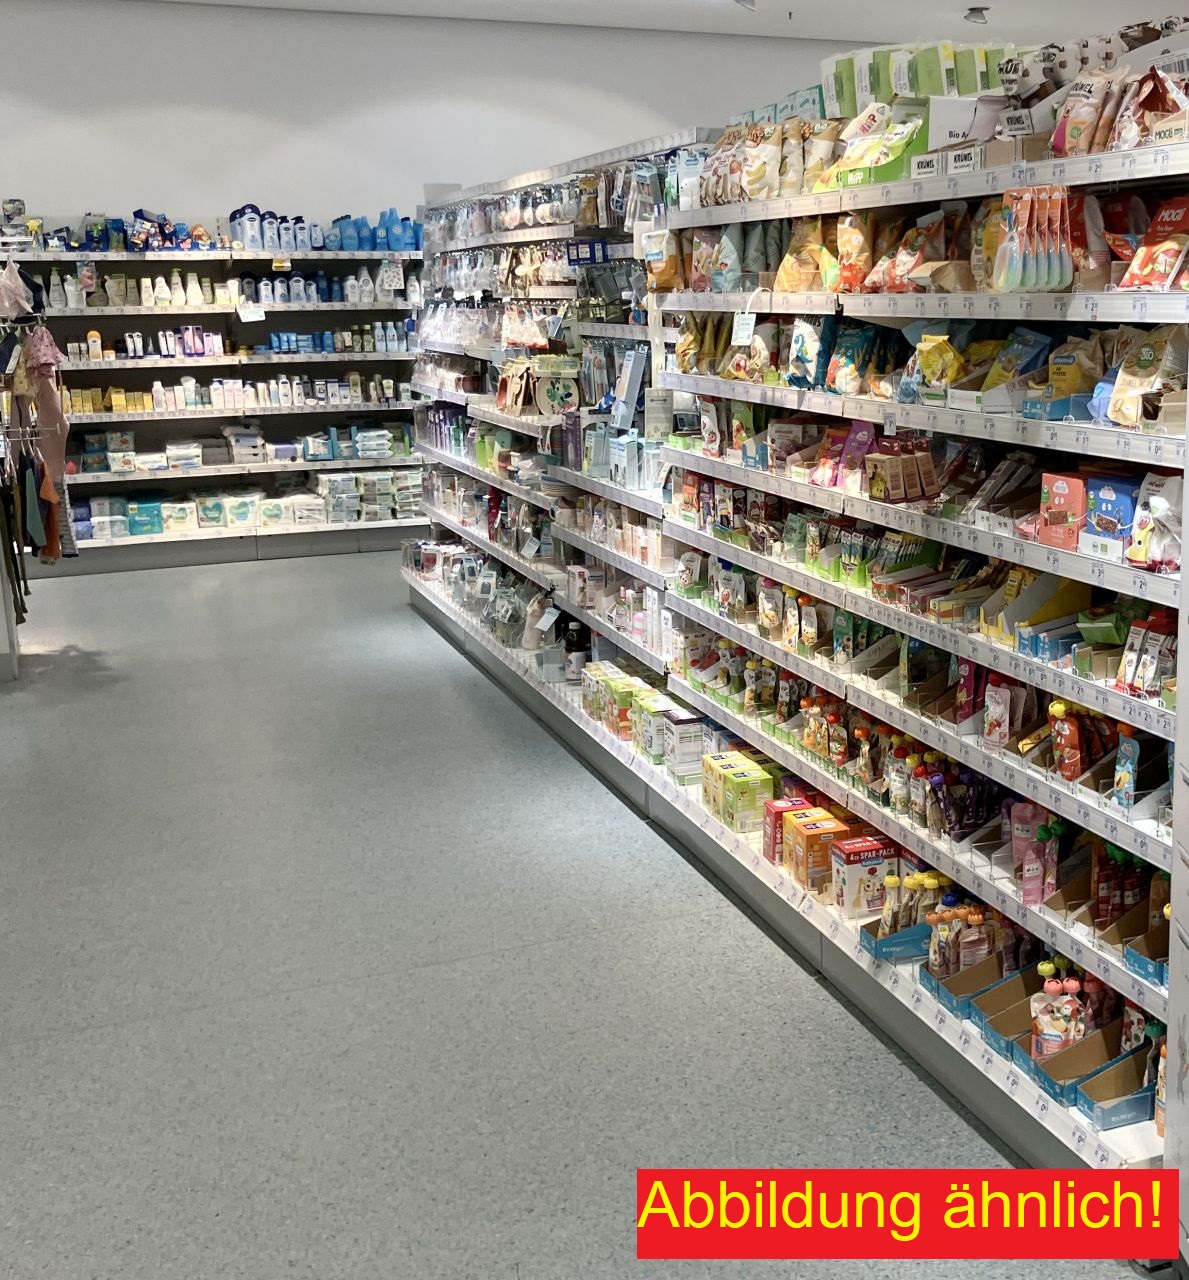 Approx. 134.30 m of drugstore shelves / used shop shelves, suitable for approx. 697 m² of sales area